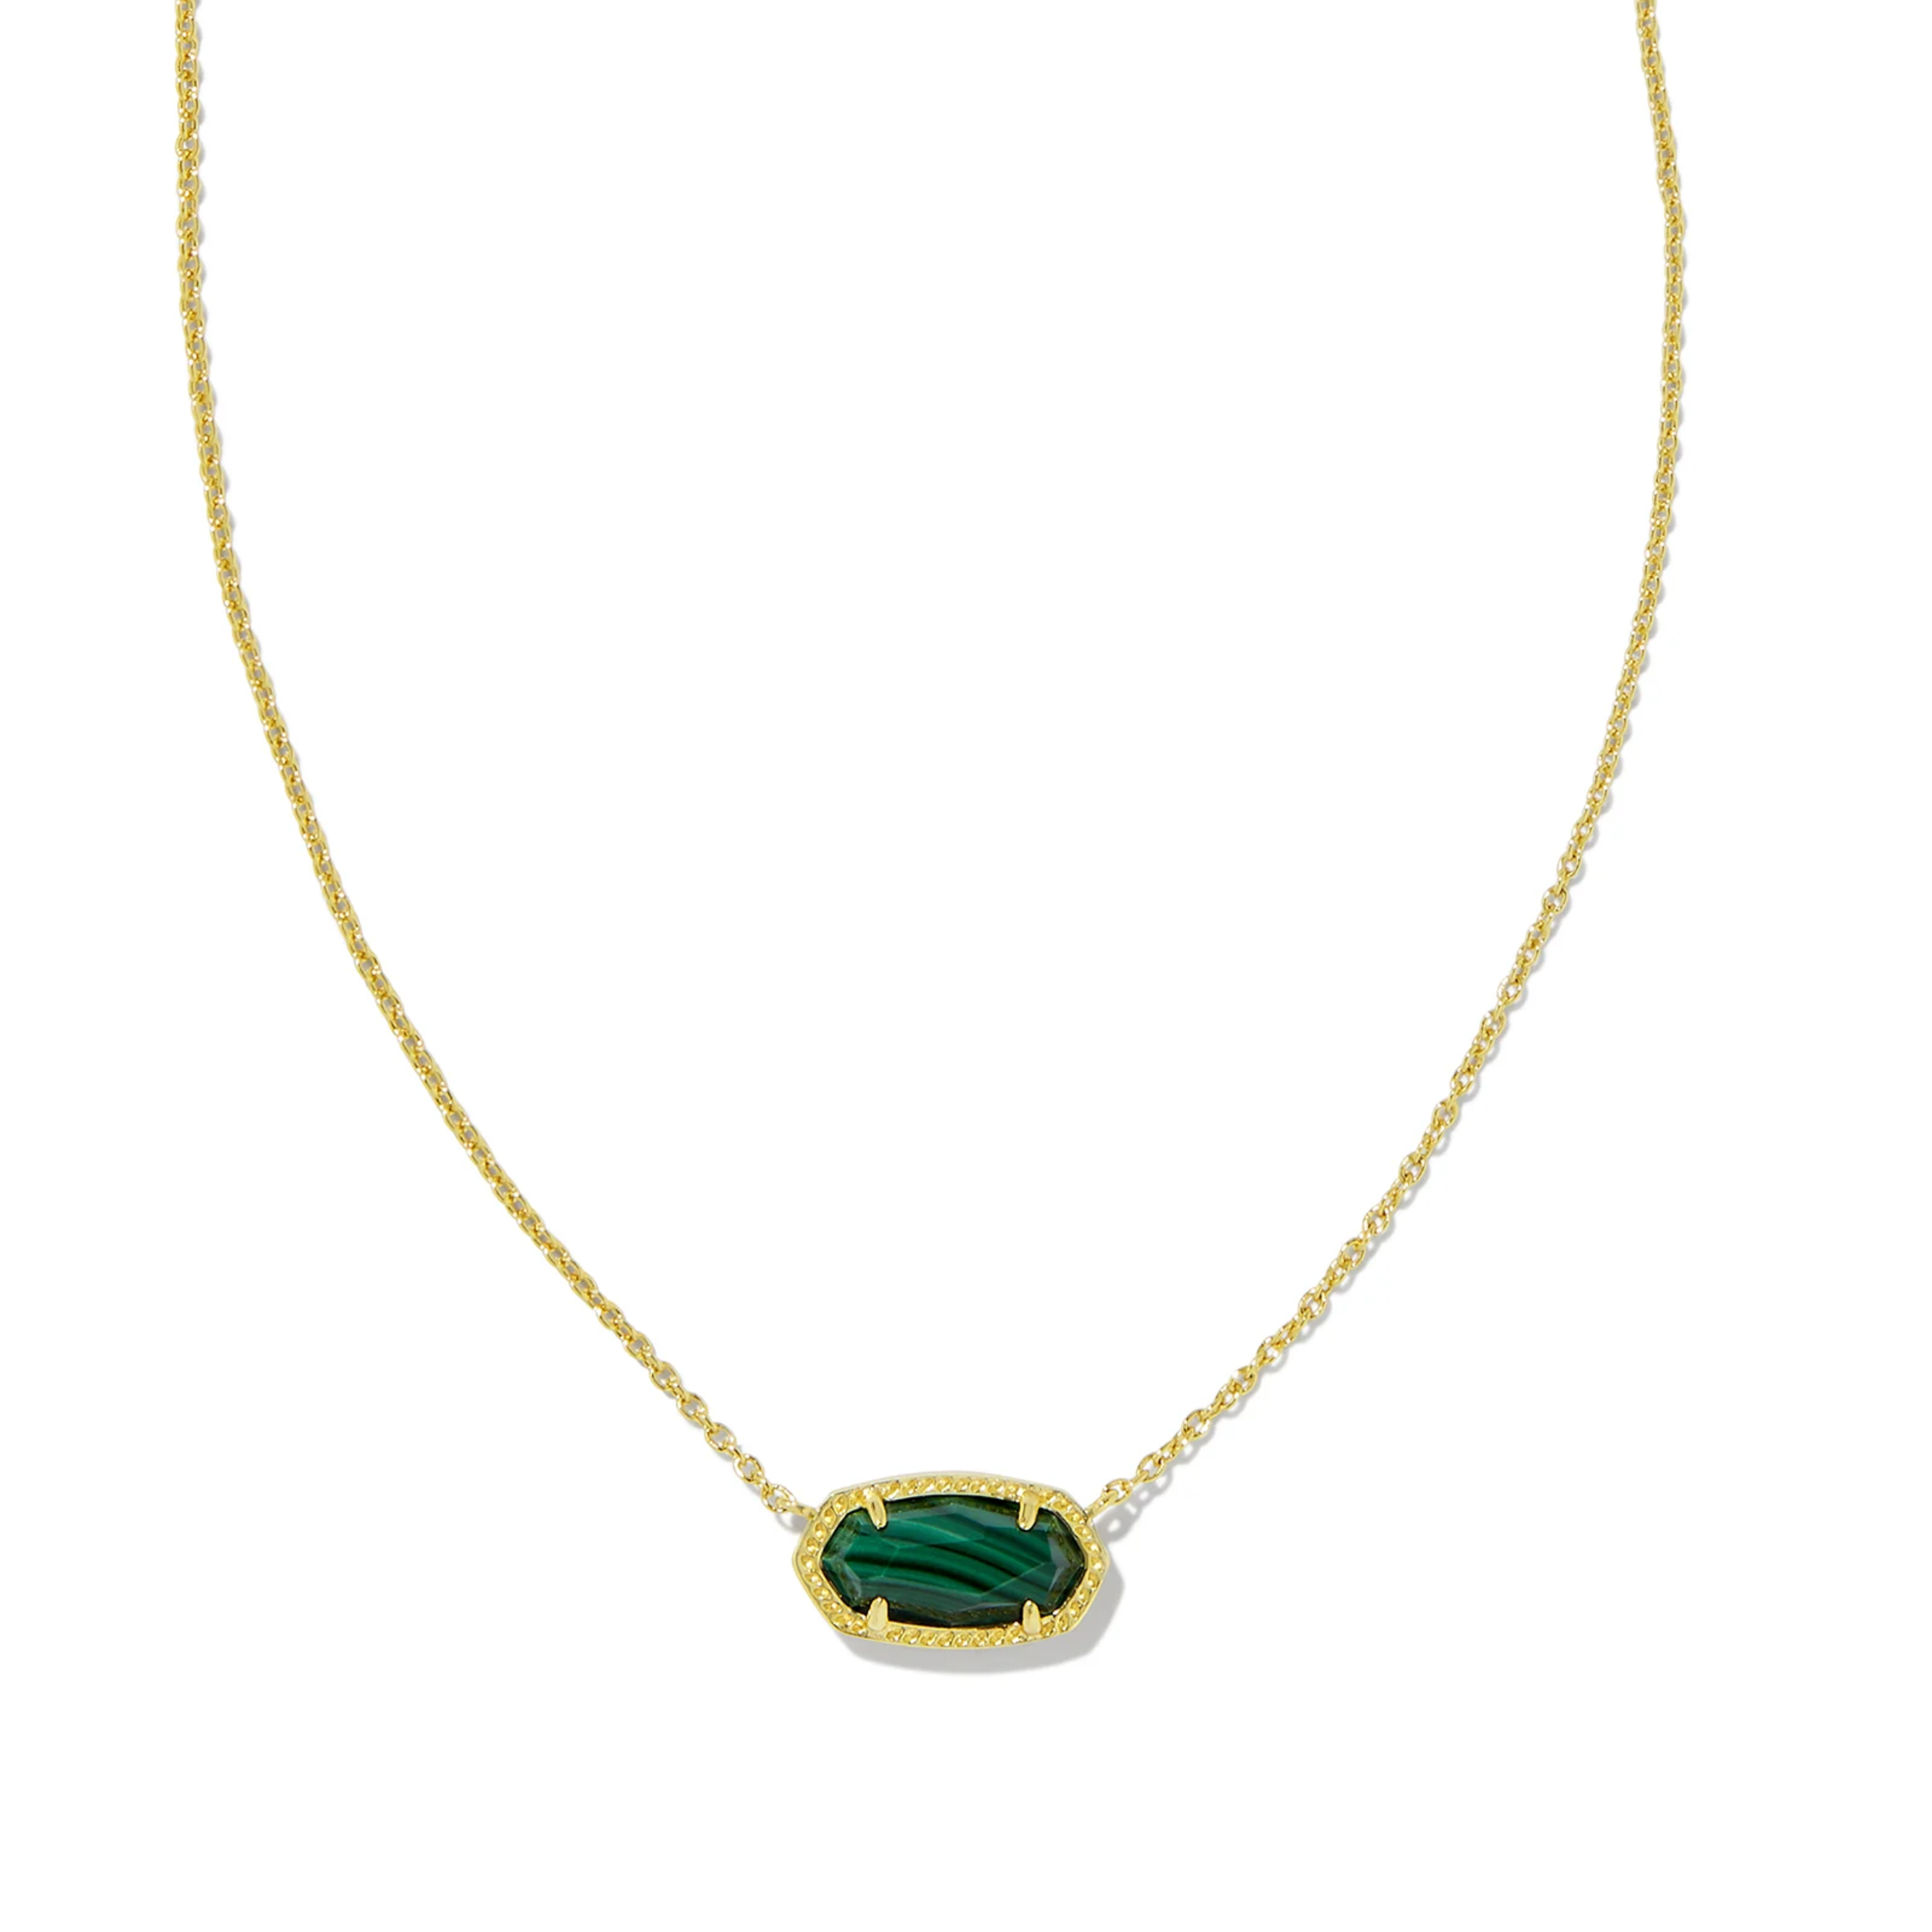 This Elis Gold Short Pendant Necklace in Green Malachite by Kendra Scott is pictured on a white background.